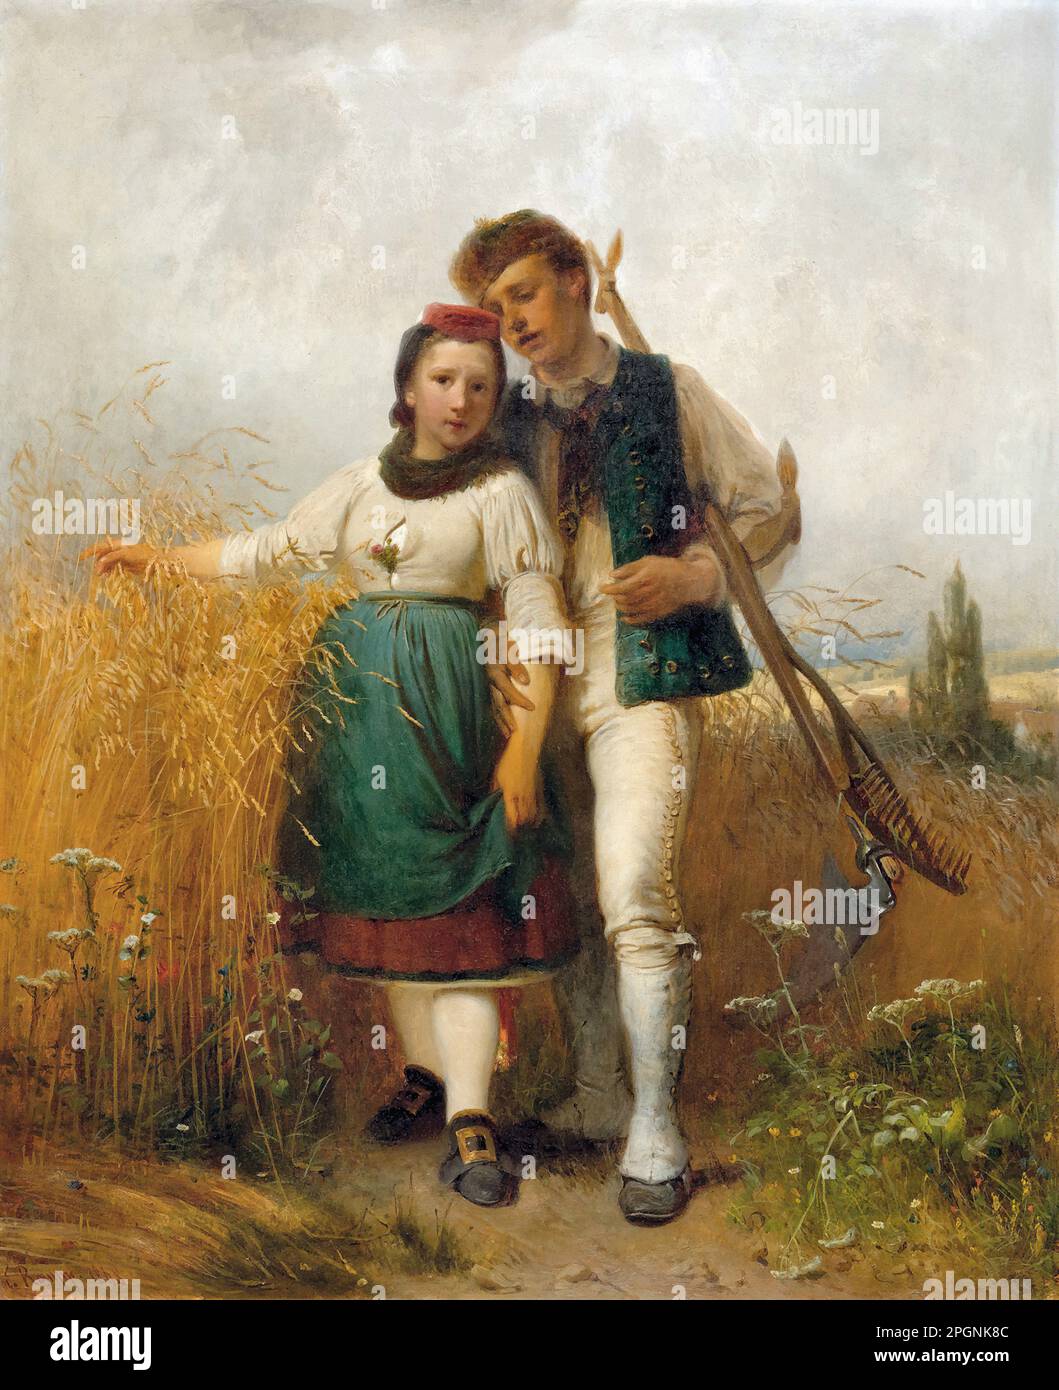 Raupp Karl - Young Peasant Couple On The Field Edge - German School - 19th Century - Raupp Karl - Junges Bauernpaar Am Feldrand - German School - 19th  Century Stock Photo